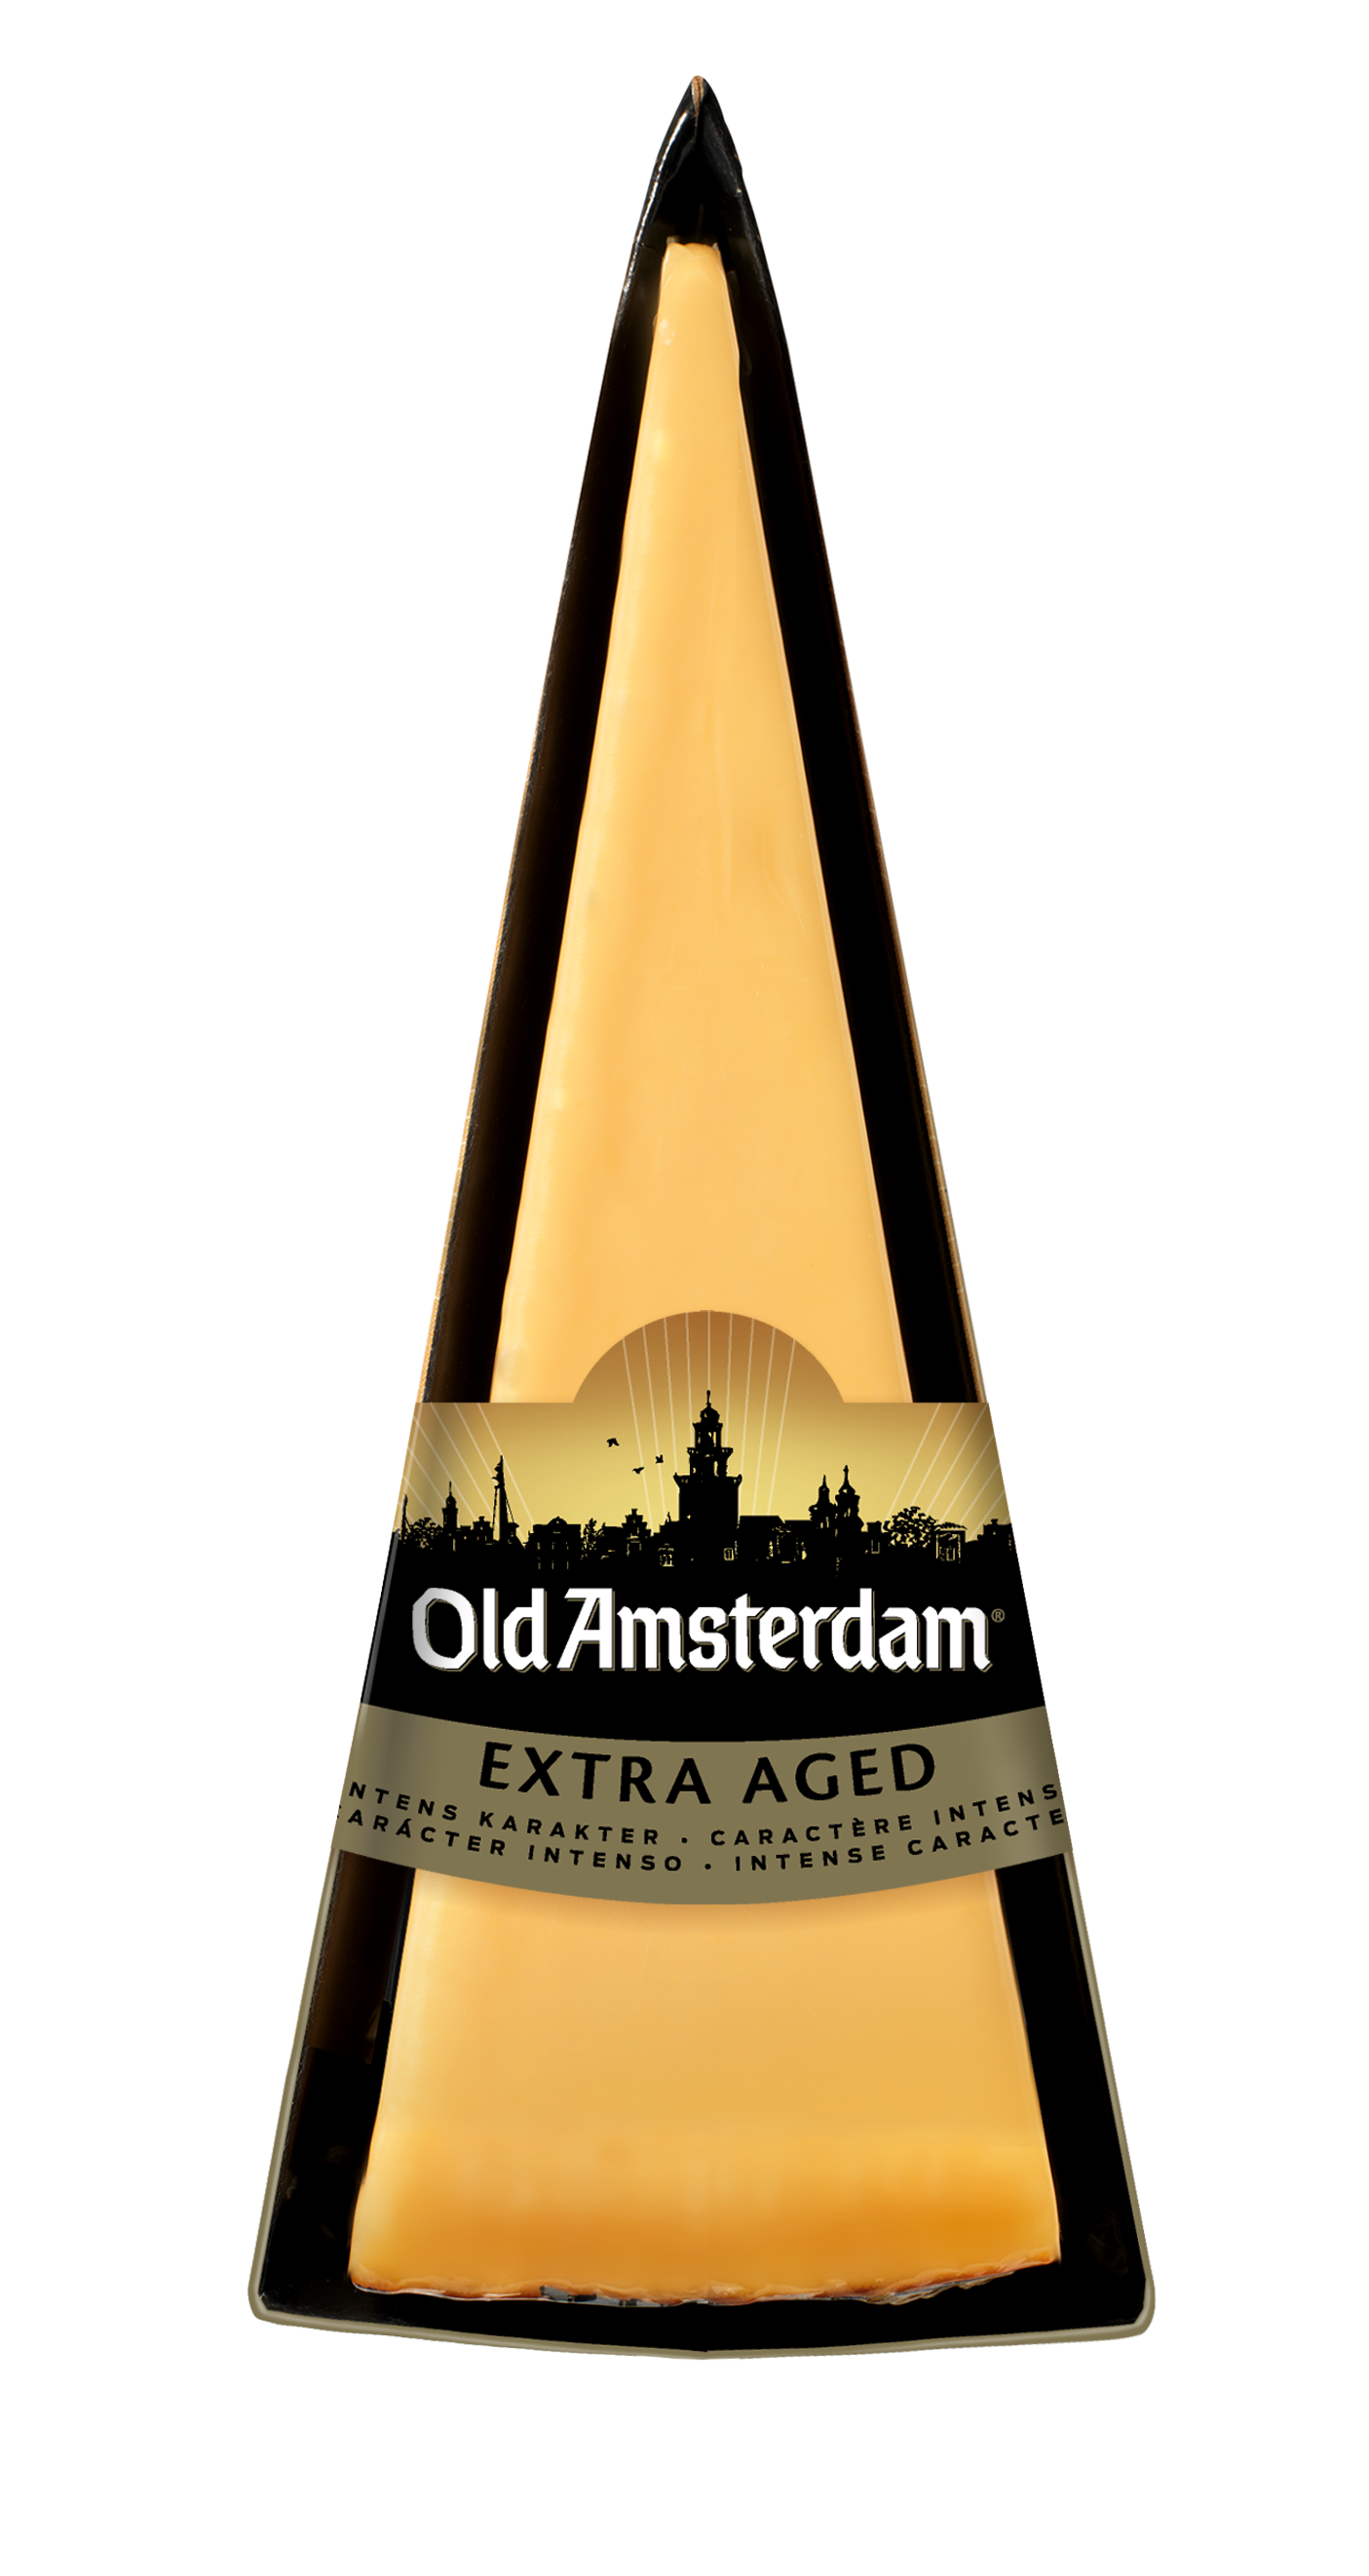 Old Amsterdam Extra Aged Schuitje